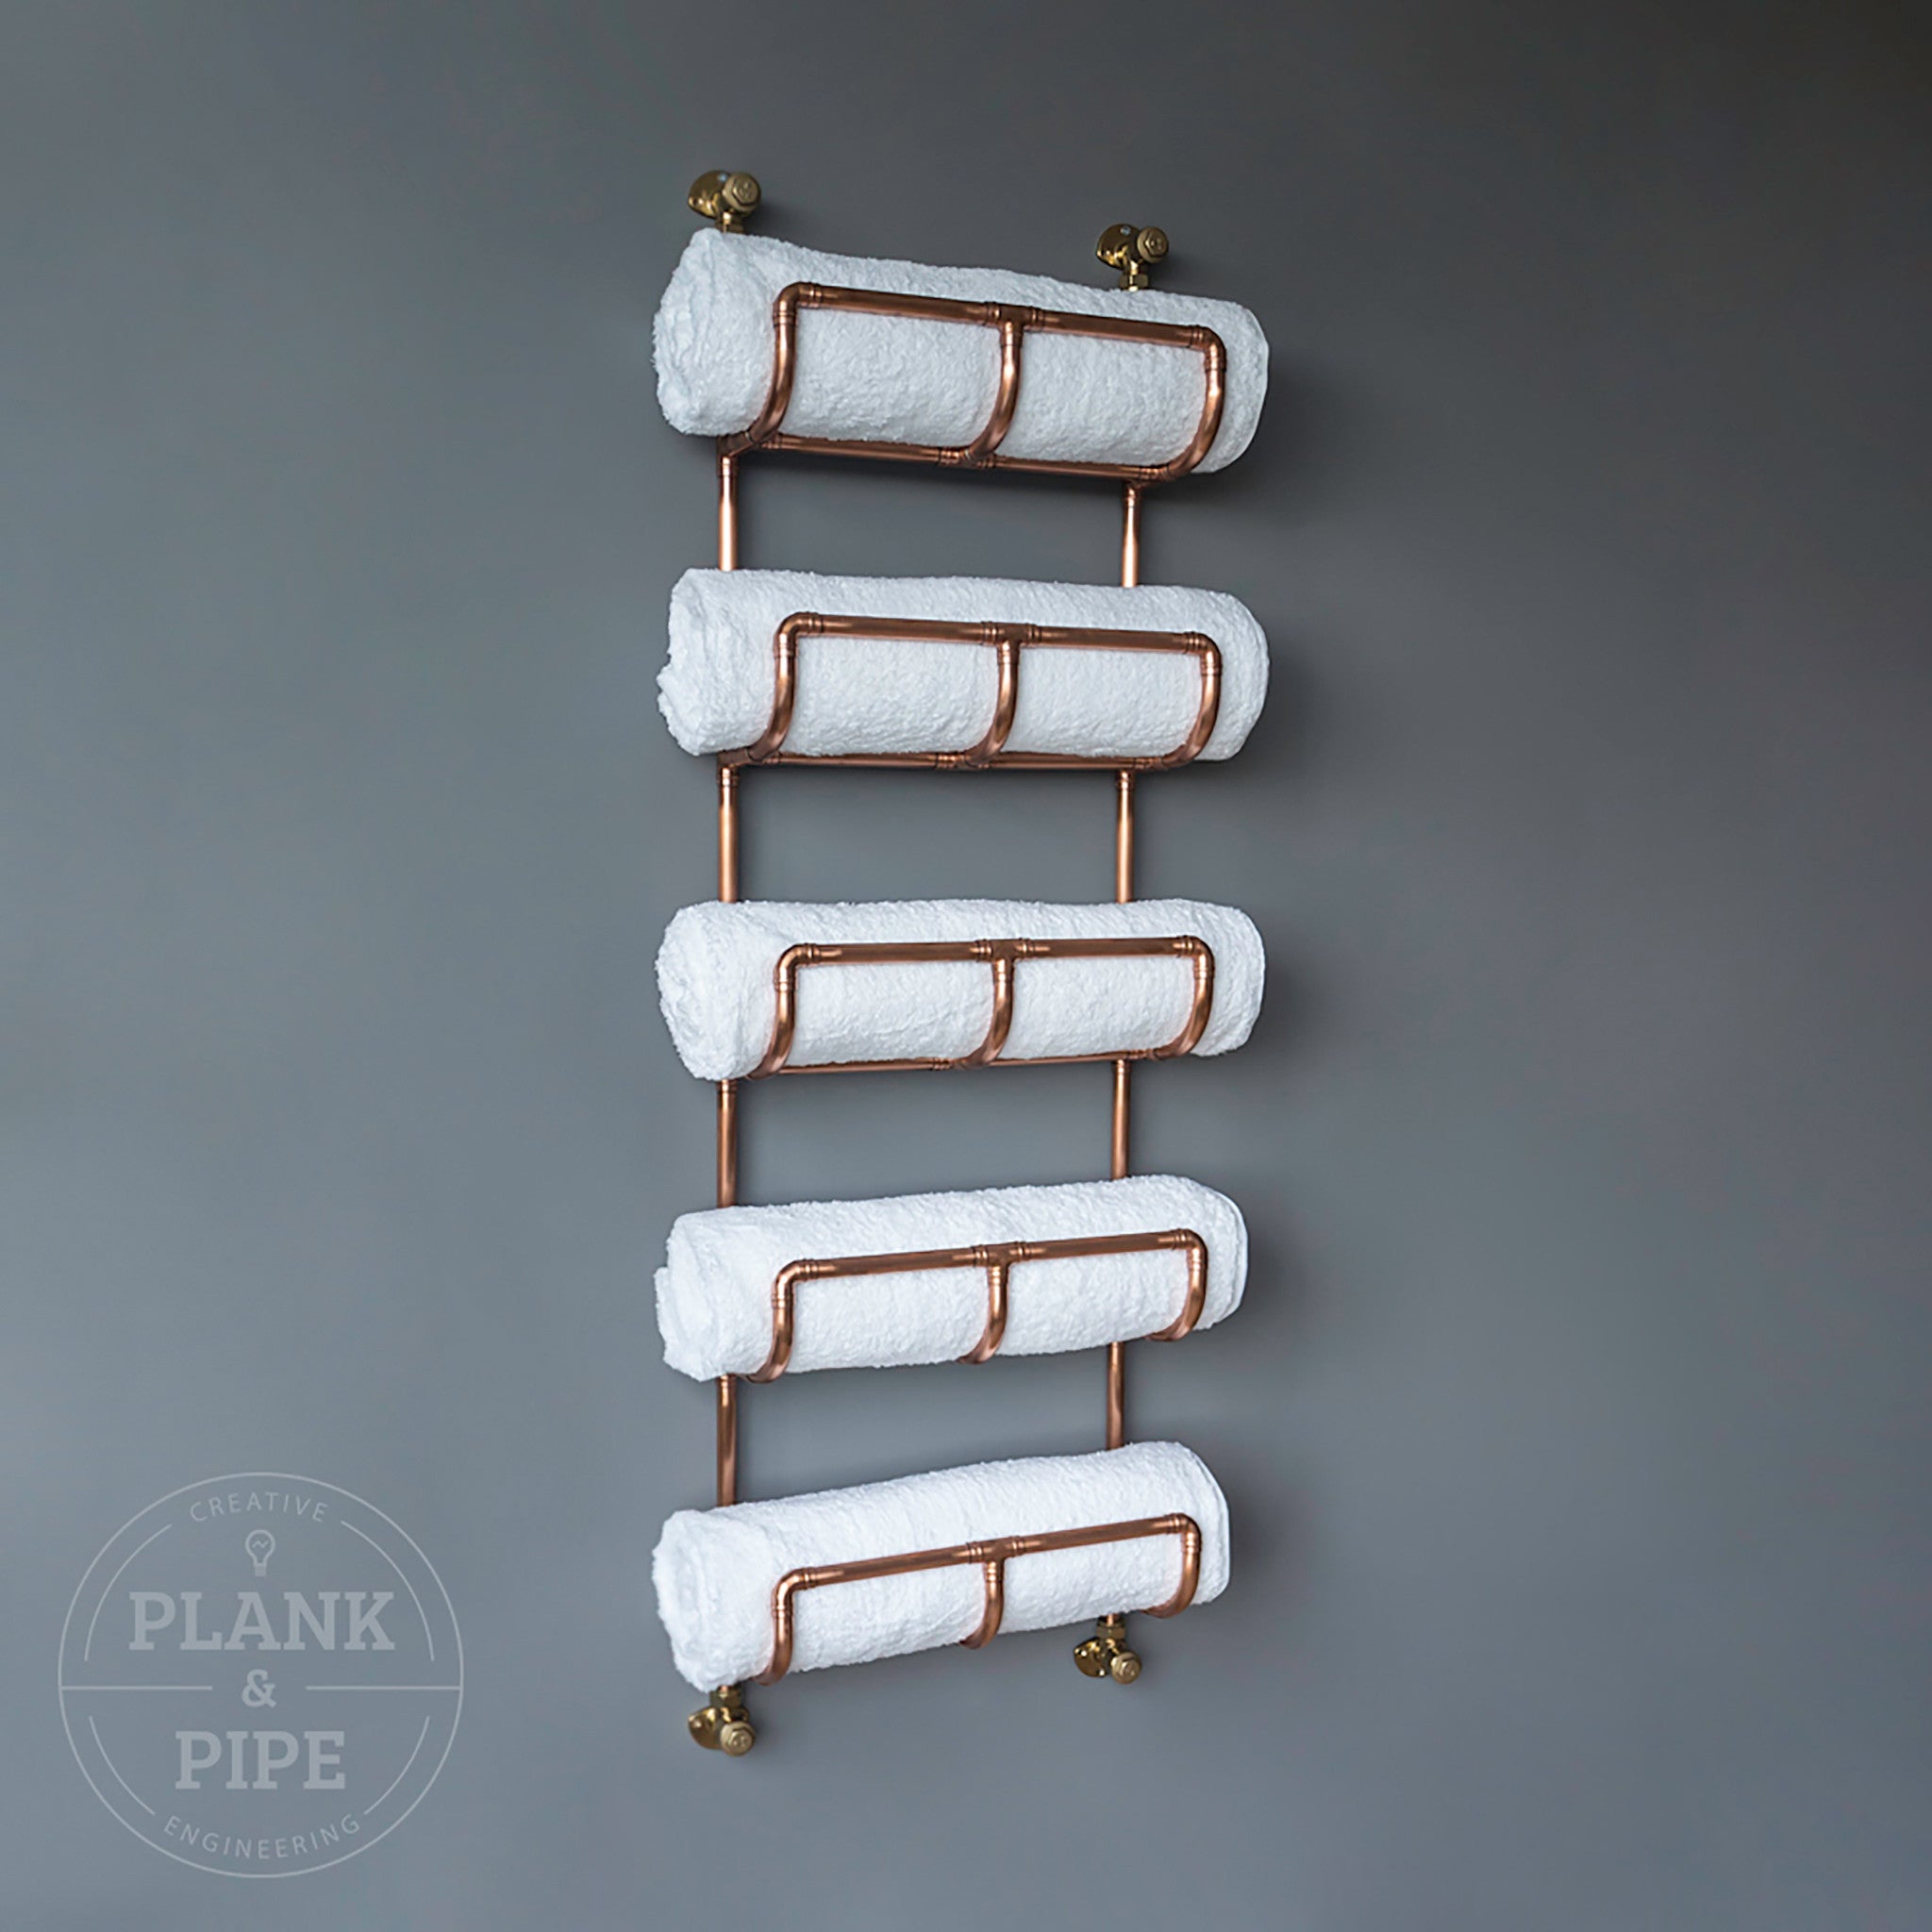 Copper towel rack holding 5 white towels